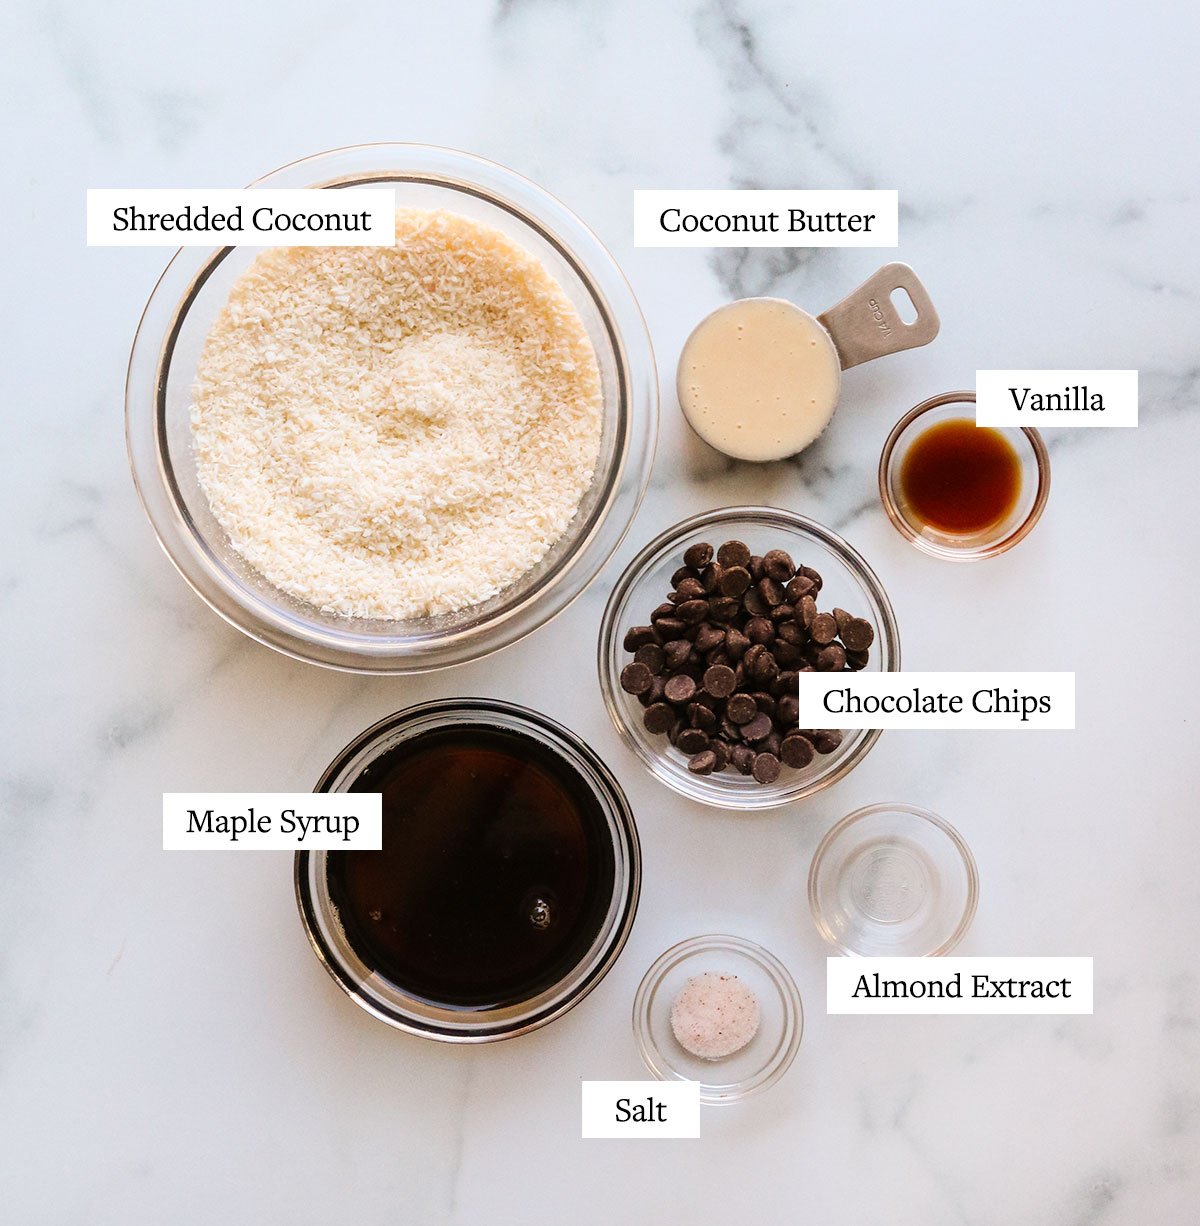 coconut macaroon ingredients labeled on a white surface.